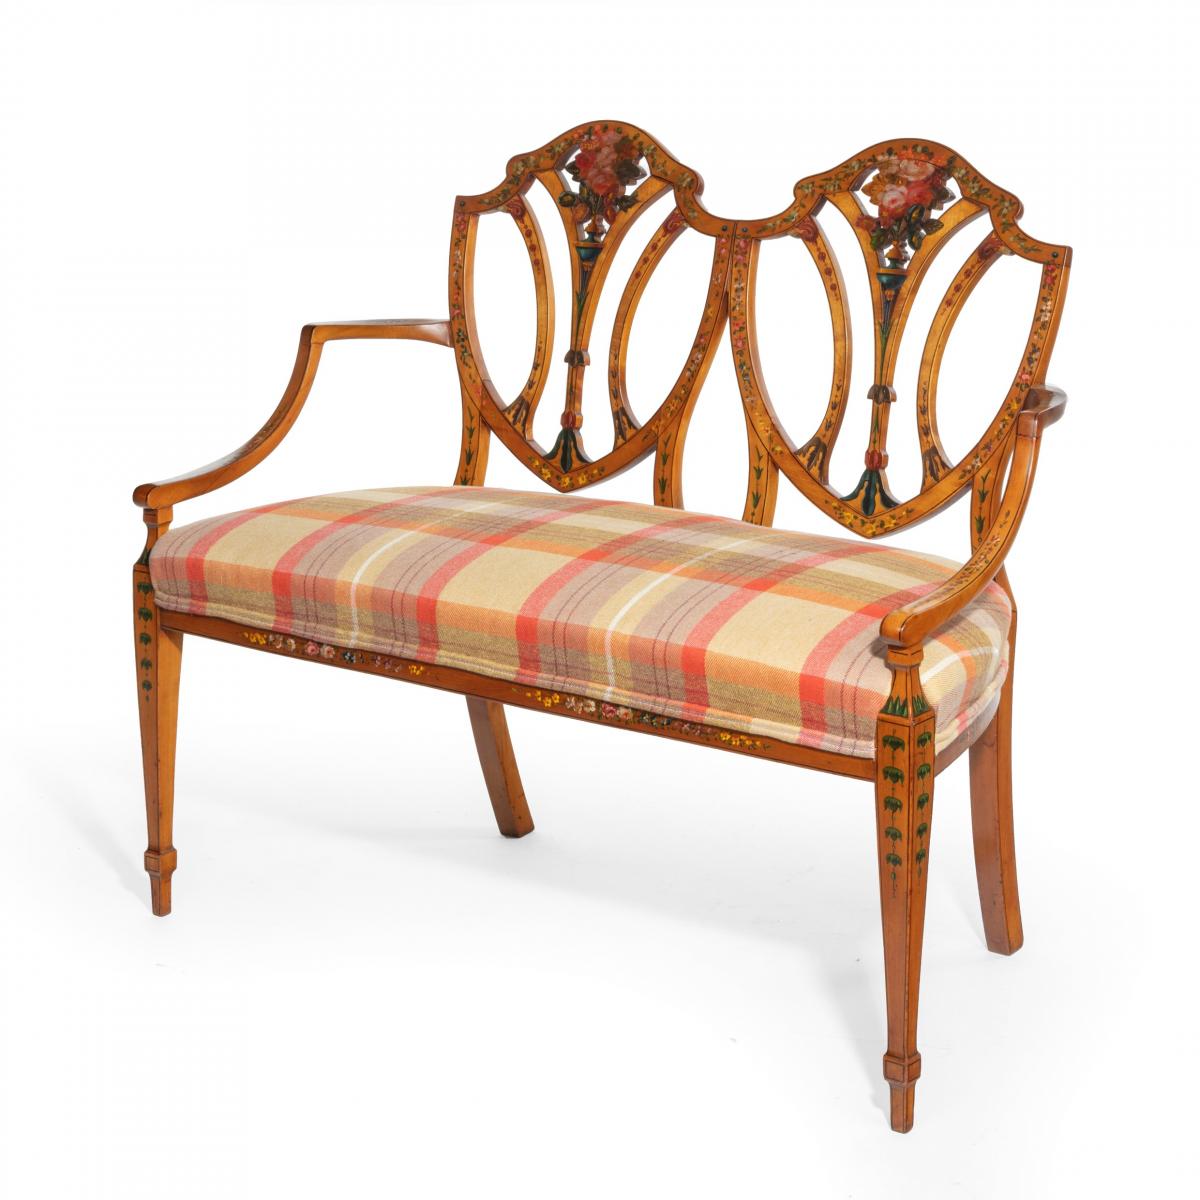 A late Victorian Sheraton revival painted satinwood two-seater settee